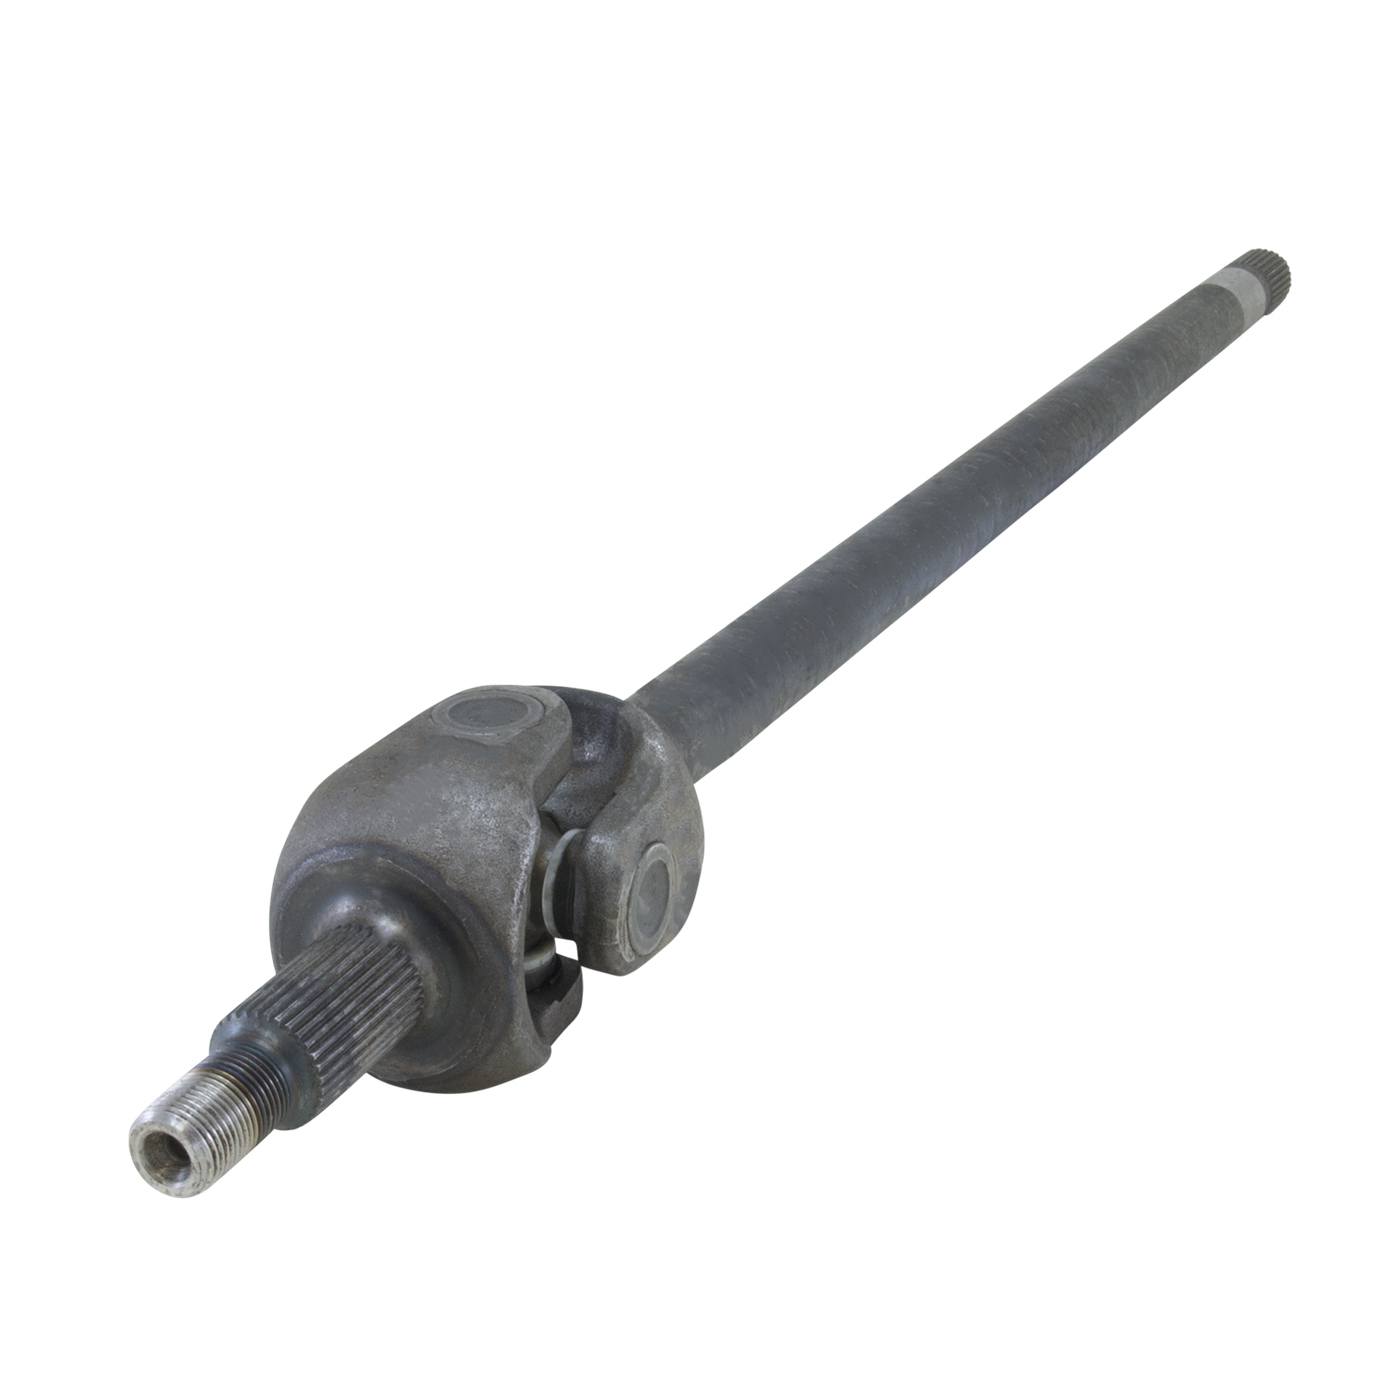 Yukon left hand axle assembly for '09-'12 Dodge 9.25" front. 